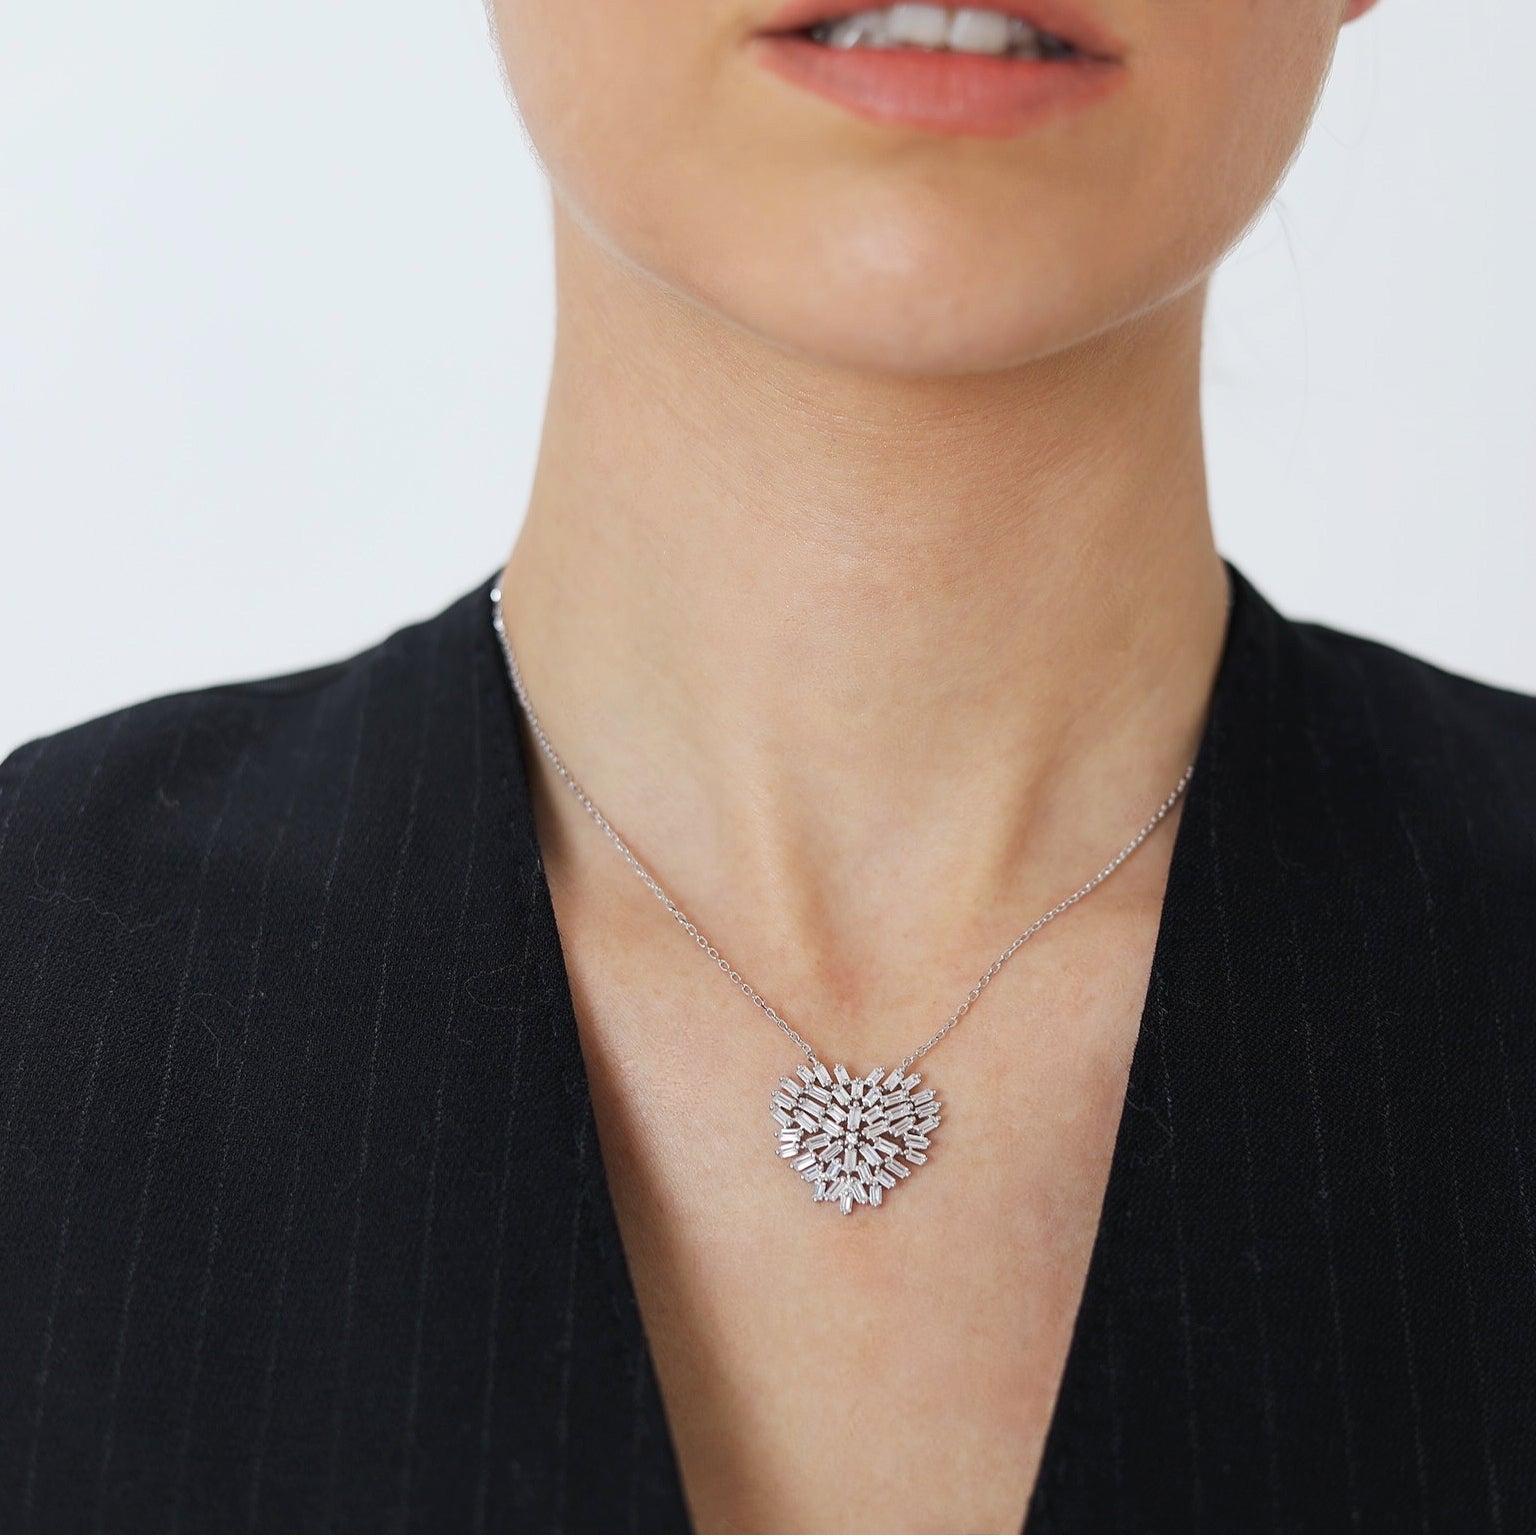 Sibela Studio|Cor Necklace: Eternal Symbol of Love and Purity in 925  Sterling Silver with White Stones | WONDER COLLECTION